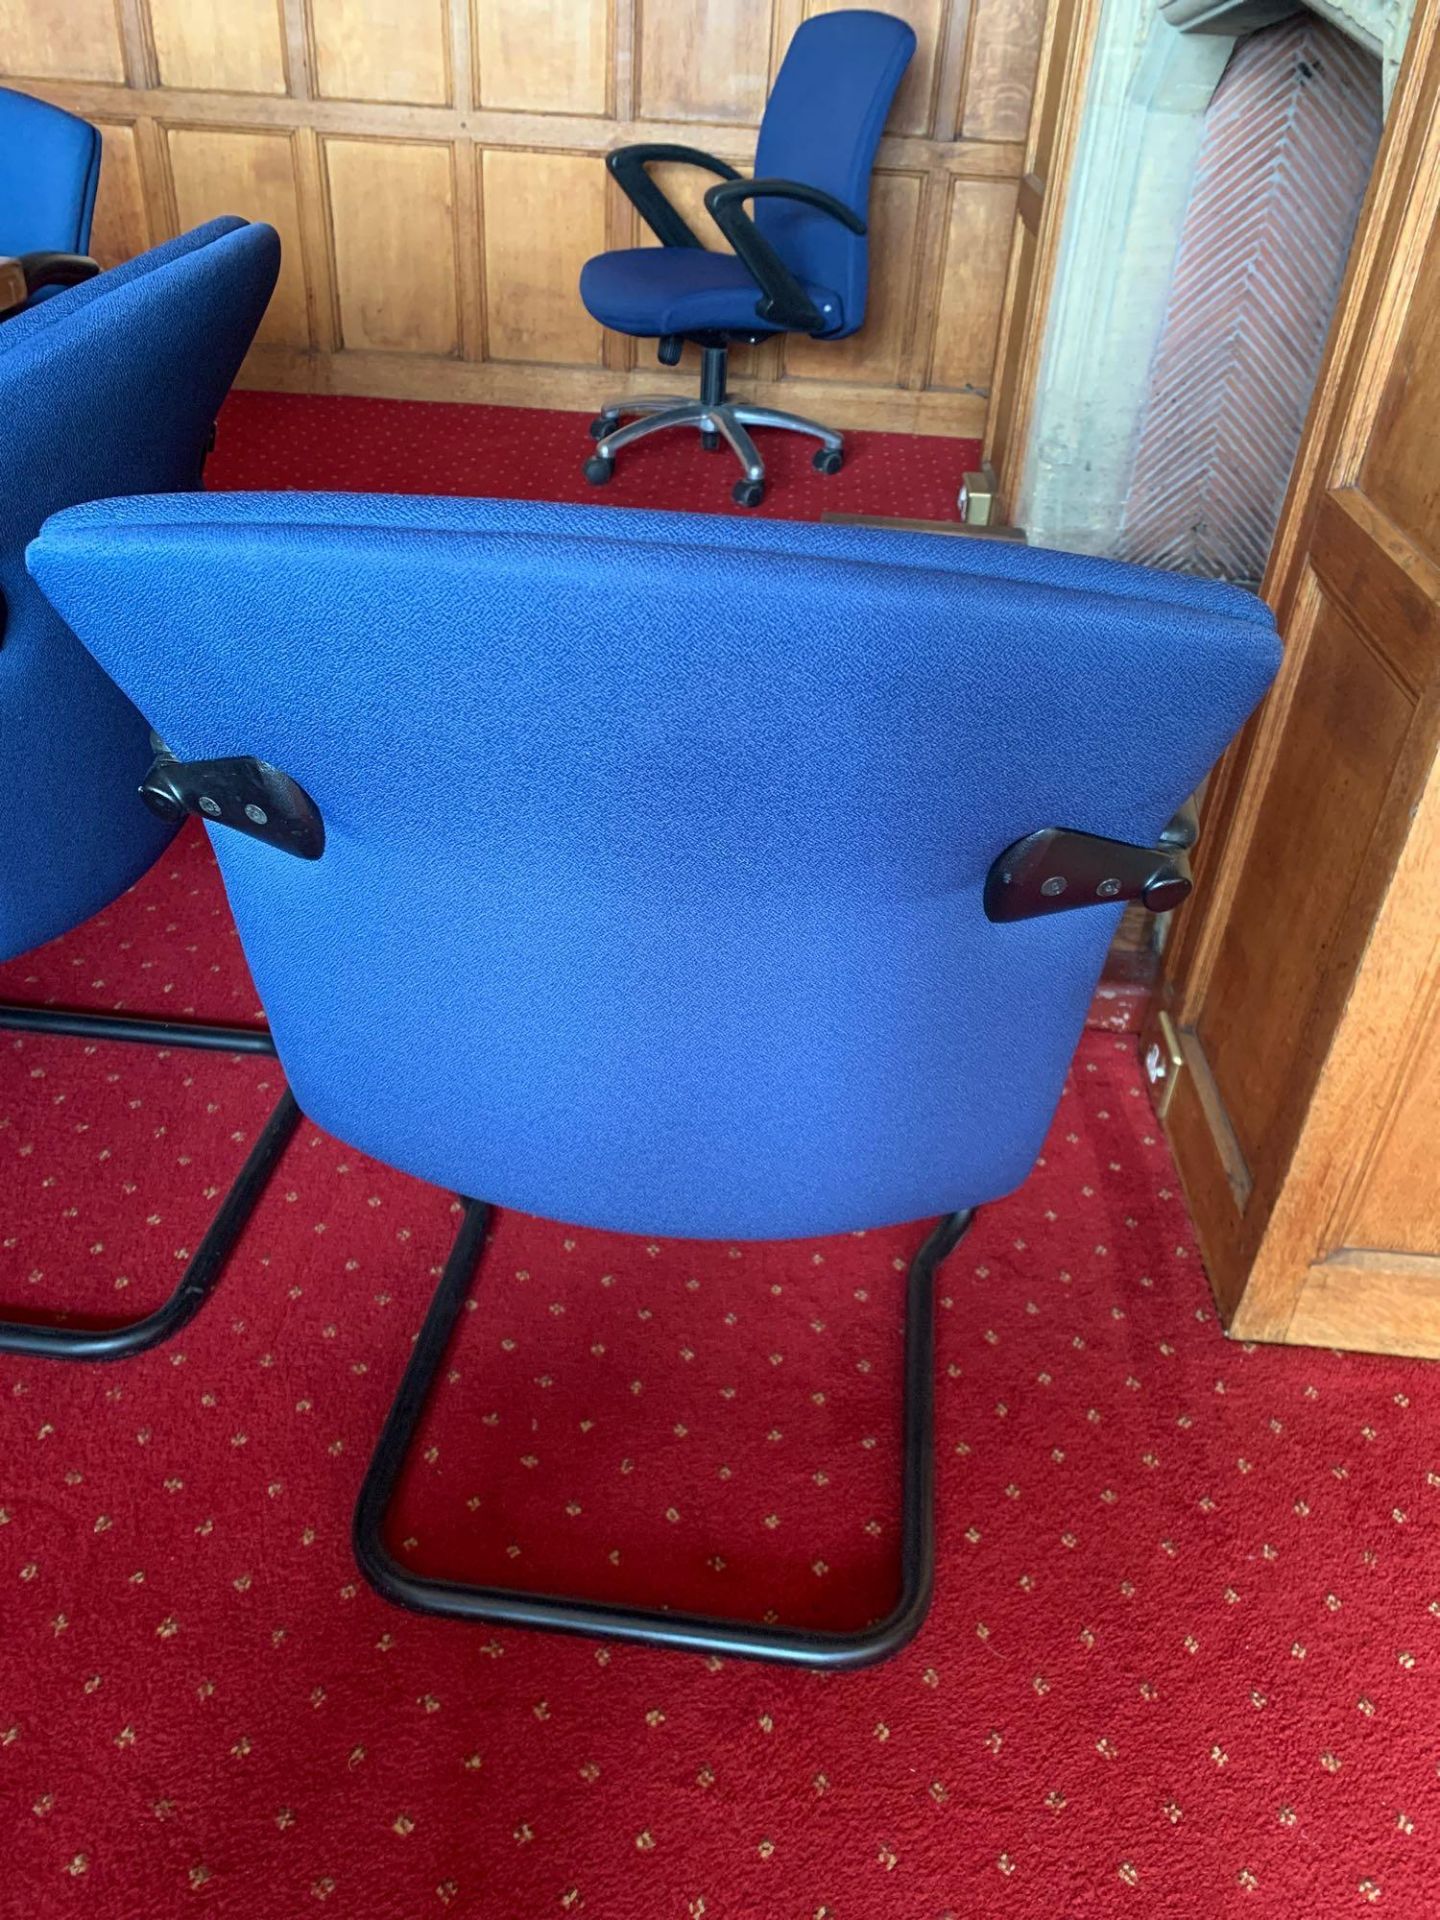 12 x Burgess Furniture Cantilever Armchairs With Blue Upholstery And Black Frame - Image 3 of 3